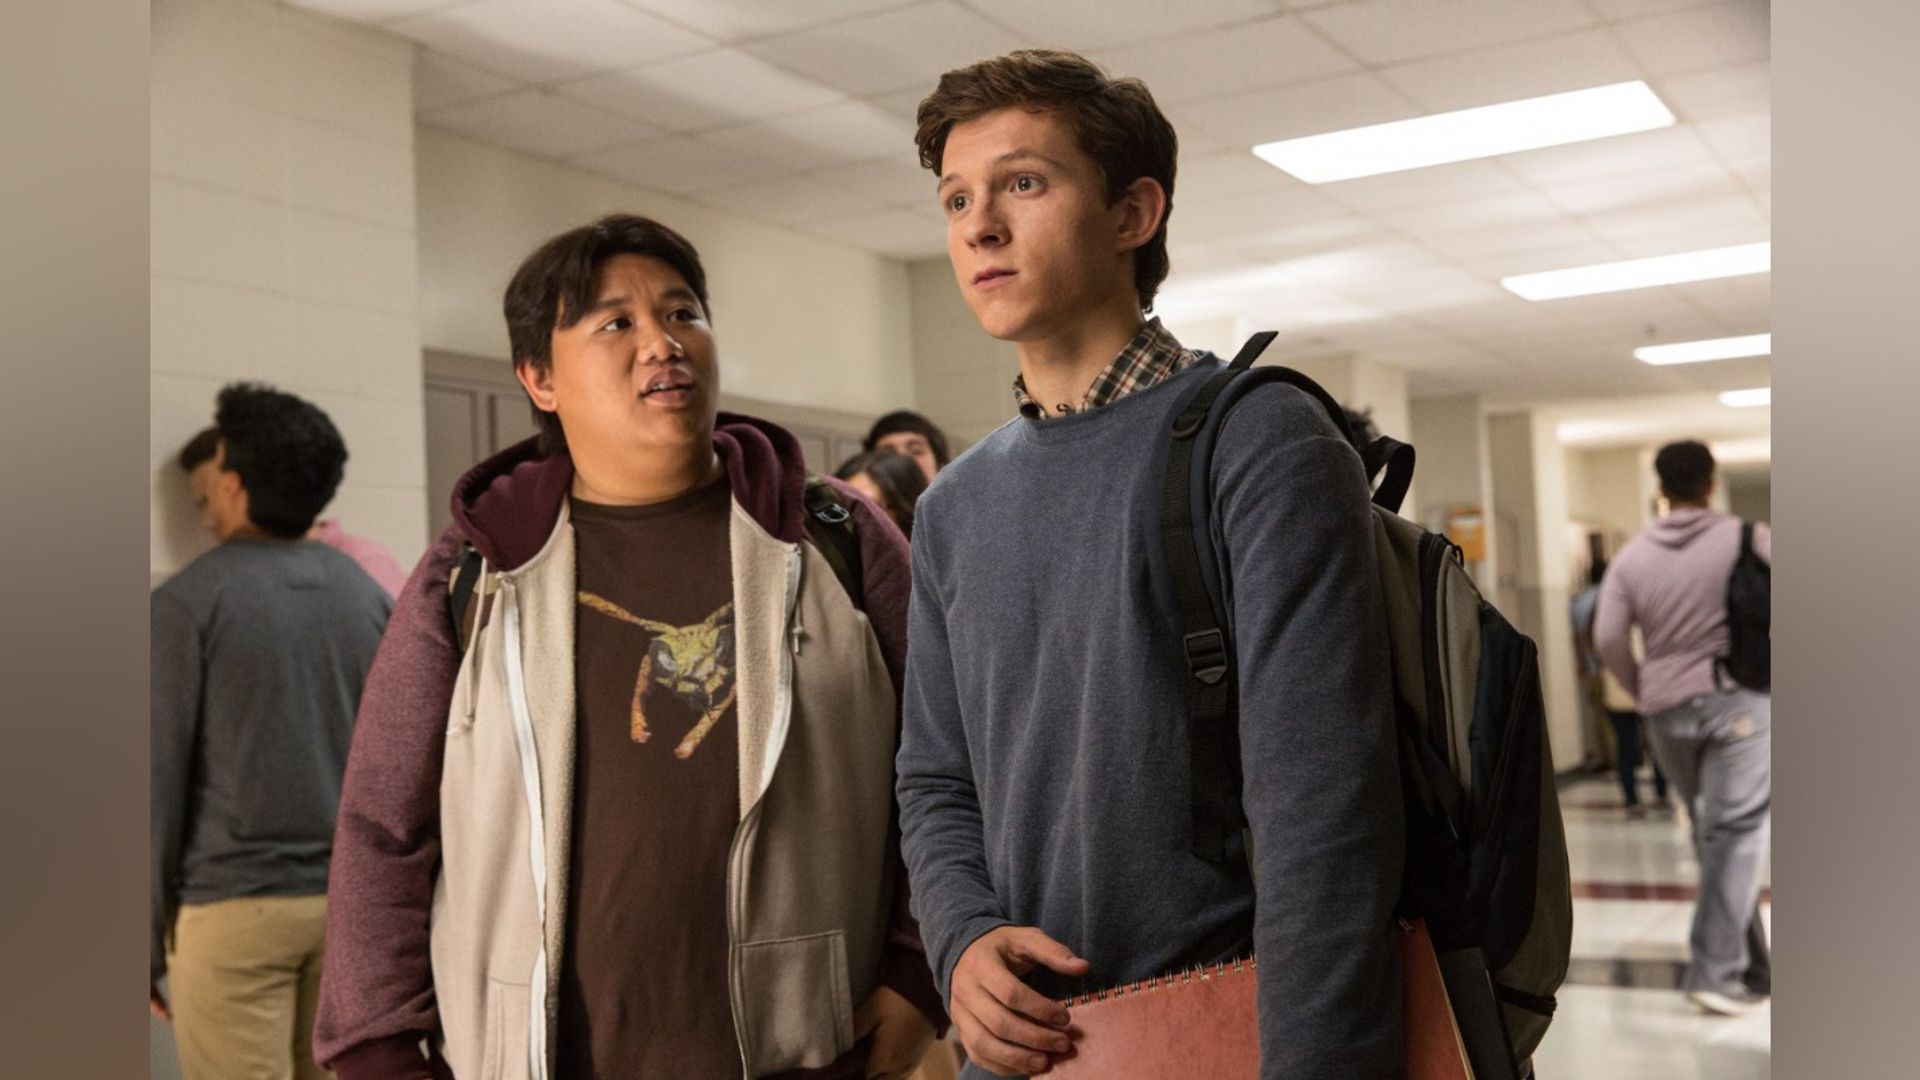  Jacob Batalon in the movie Spider-Man: Homecoming